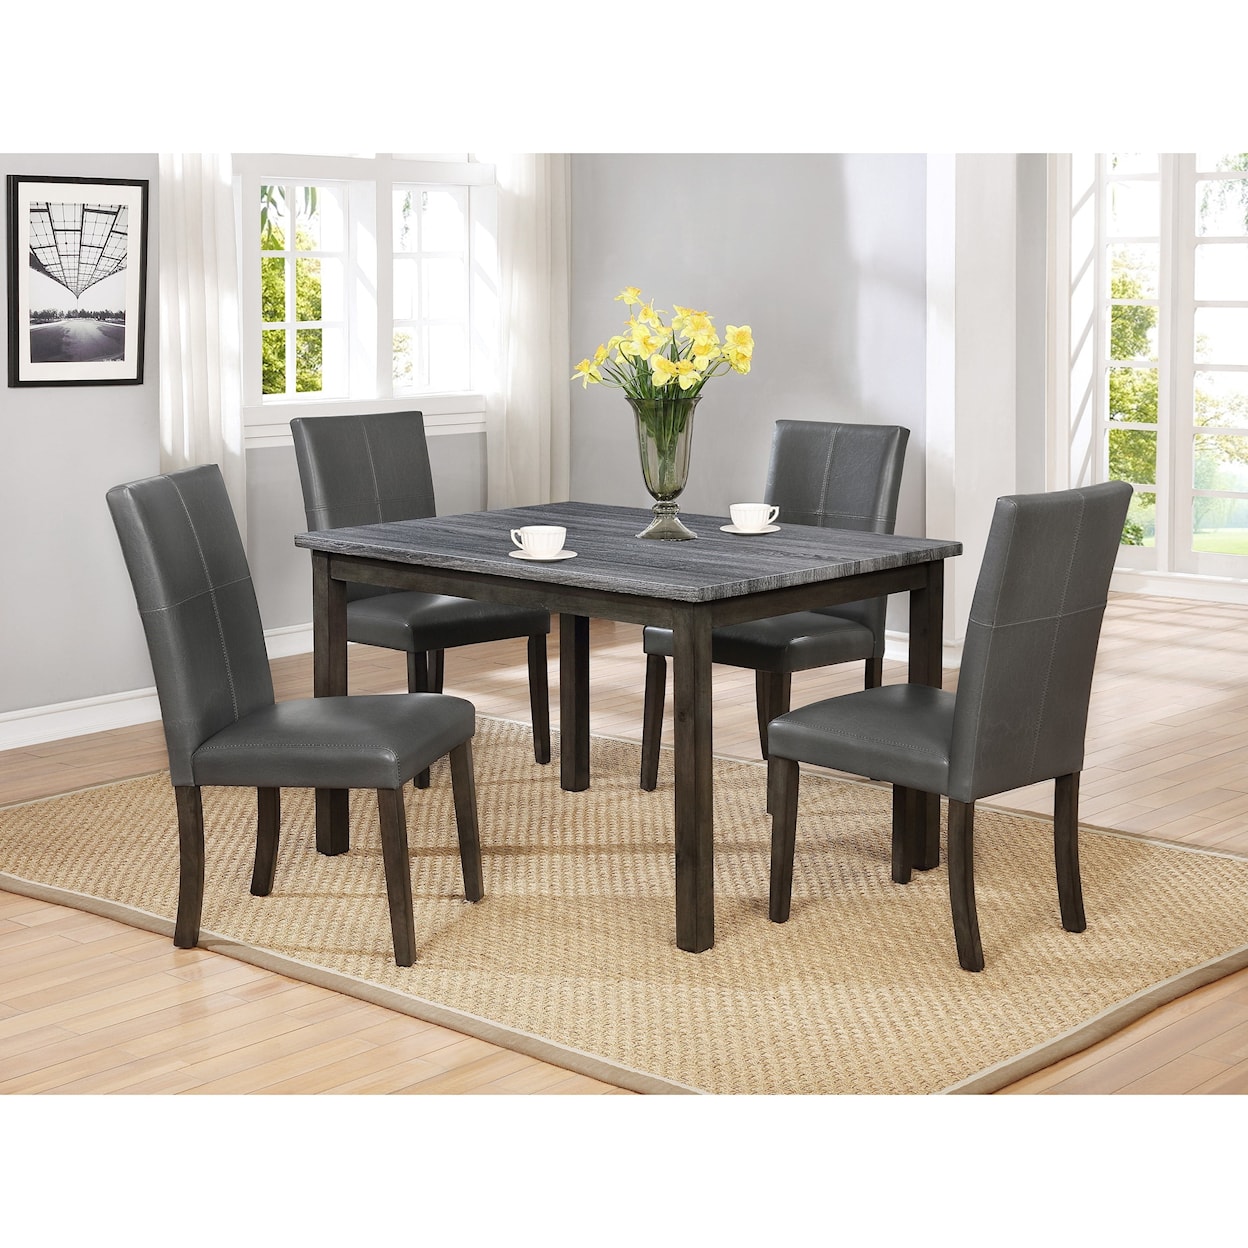 Crown Mark Pompei Dining Table Grey